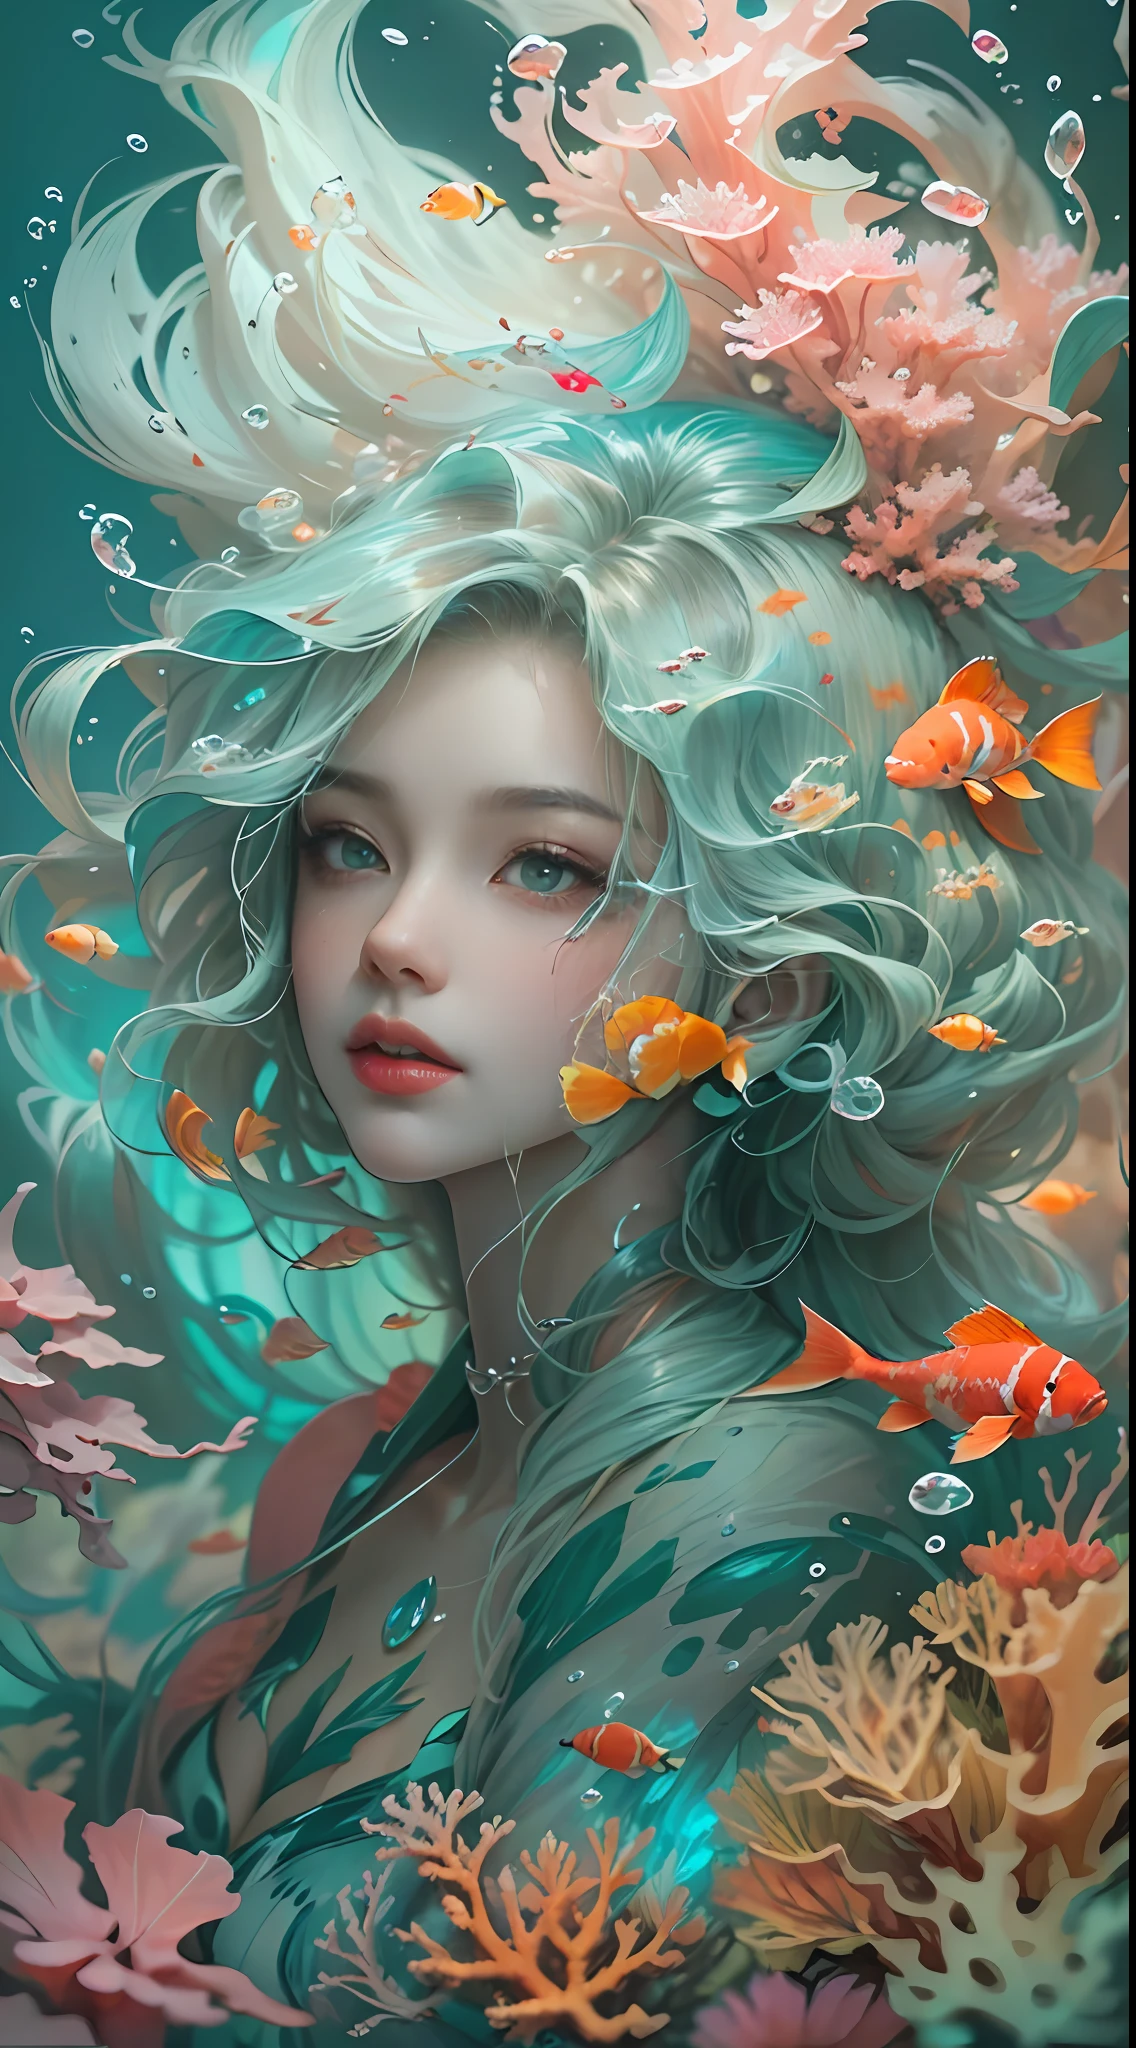 ModelShoot style, (Extremely detailed Cg Unity 8K wallpaper), A chaotic storm of intricate liquid smoke in the head, Stylized abstract portrait of beautiful girl, wetted skin,Koi，Beautiful koi，Flocks of koi,carp，Strange shaped corals，ocean floor，Beautiful coral reef in the background，Rochas,Marine life，colorful coral reef,Decorate with coral reefs,author：Petros Afshar, ross tran, tom whalen, Peter Mohrbacher, Art germ, Broken glass, ((bubbly underwater scenery)) Radiant light octane rendering is highly detailed, inspired by Yanjun Cheng, Beautiful digital artwork, Guviz-style artwork, 8K highly detailed digital art, Beautiful digital illustration, Cute detailed digital art, stunning digital illustration, A beautiful artwork illustration, Exquisite digital illustration,8K detailed digital art,